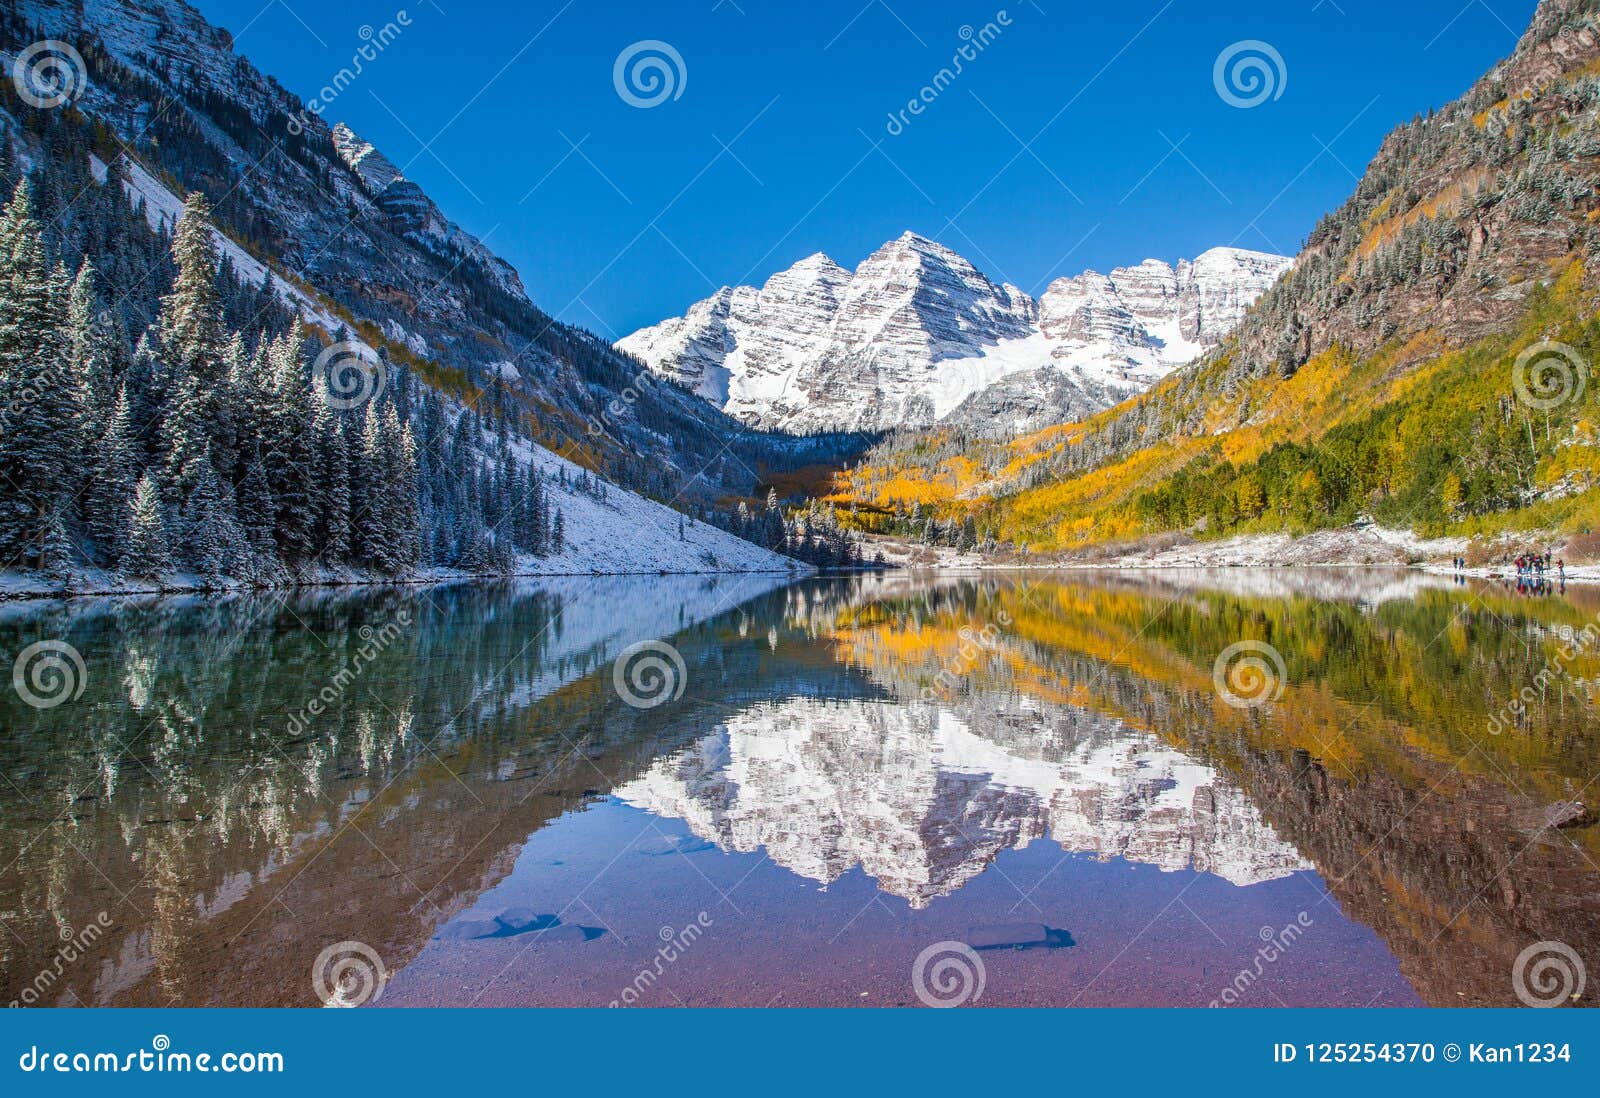 maroon bells in fall foliage after snow storm in aspen, colorado